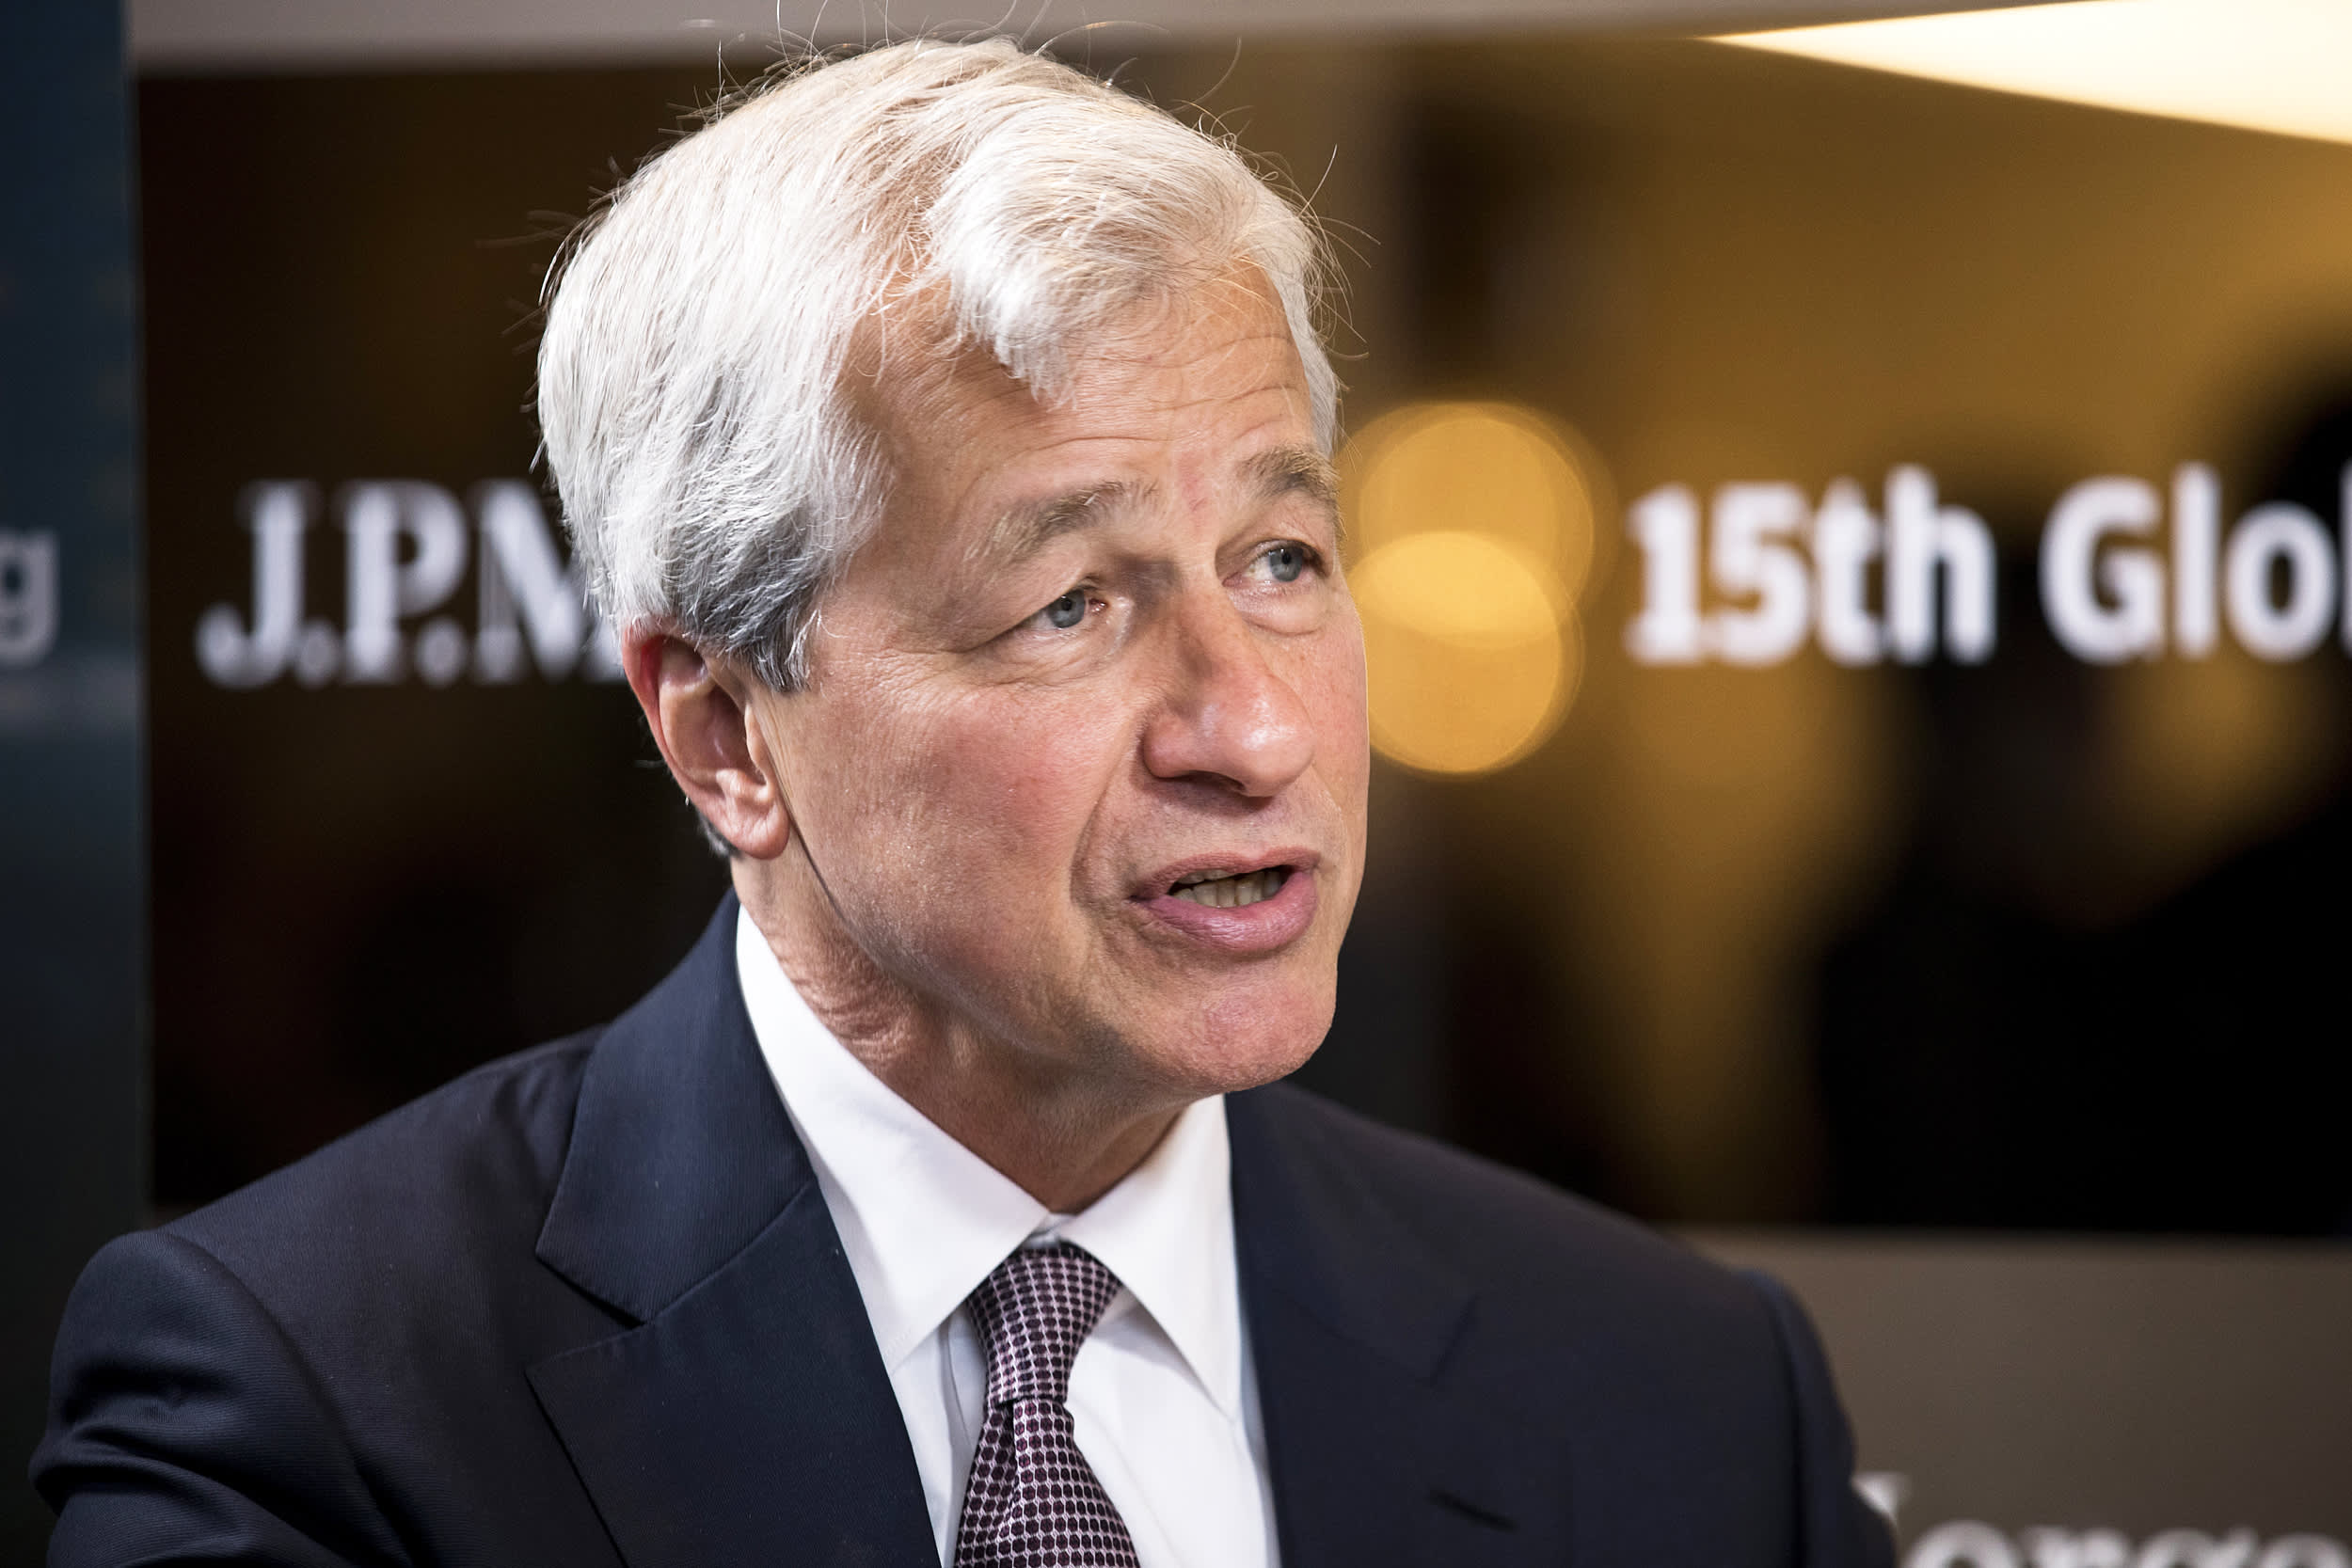 Jamie Dimon details JPMorgan strength in annual letter, says US strong